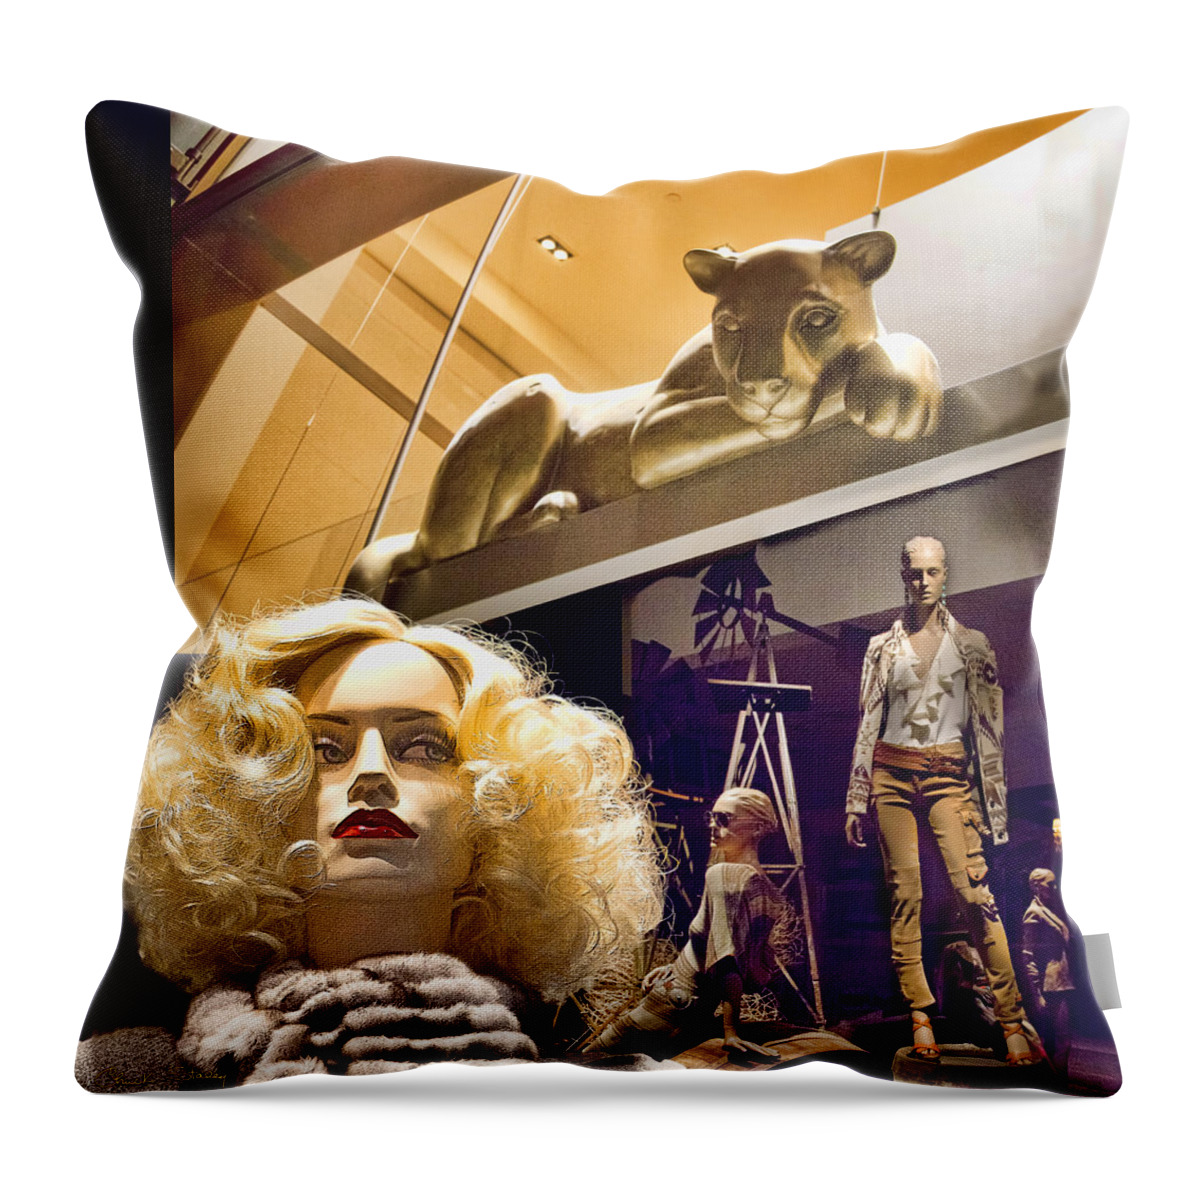 Luna Goes Shopping Throw Pillow featuring the photograph Luna Goes Shopping by Chuck Staley